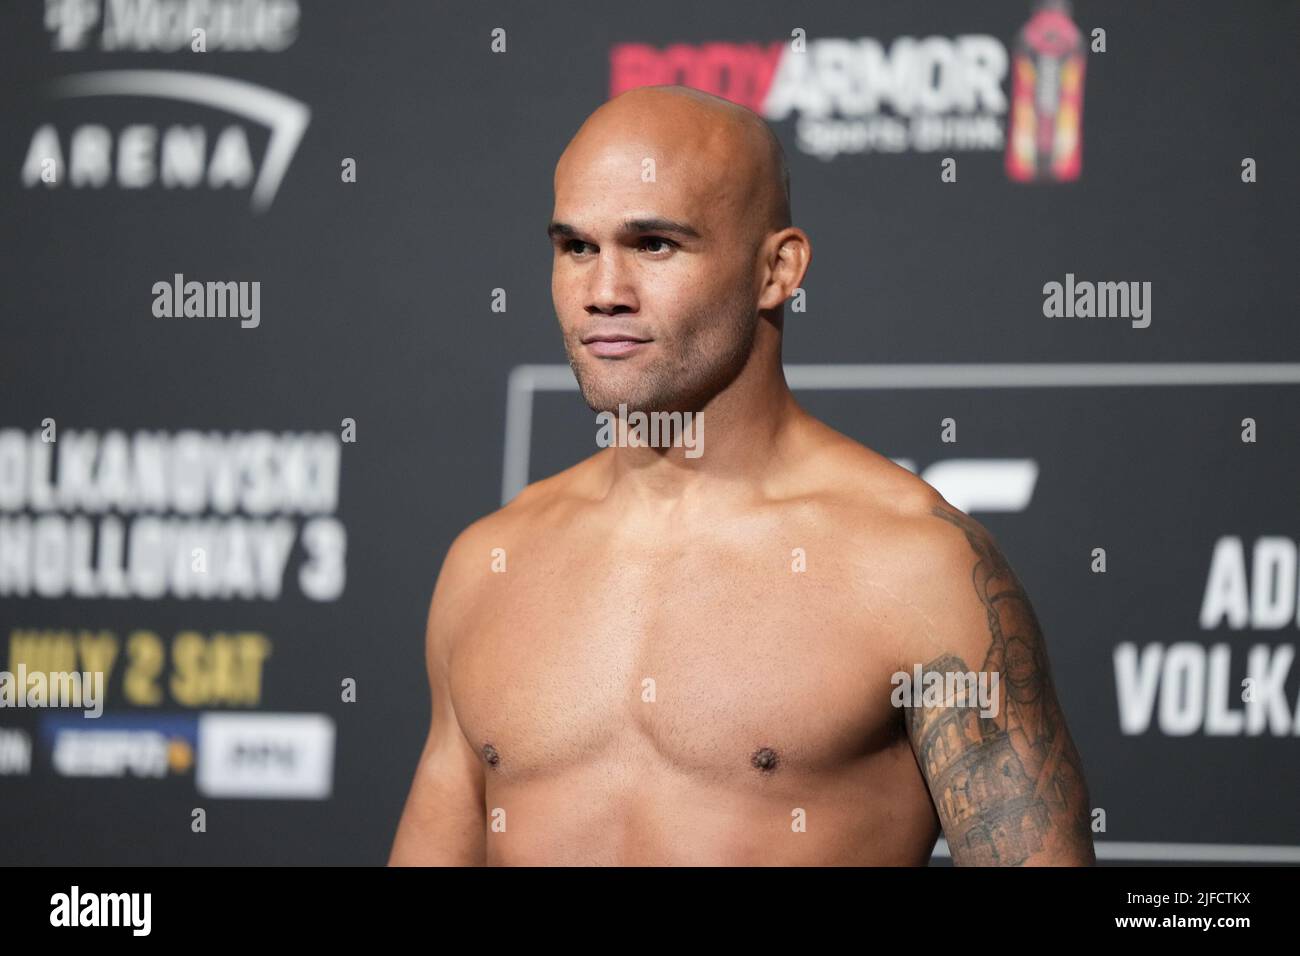 July 1, 2022, LAS VEGAS, NV, LAS VEGAS, NV, United States: LAS VEGAS, NV - June 1: Robbie Lawler steps on the scale for the official weigh-ins at T-Mobile Arena for UFC 276 on July 1, 2022 in LAS VEGAS, NV, United States. (Credit Image: © Louis Grasse/PX Imagens via ZUMA Press Wire) Stock Photo